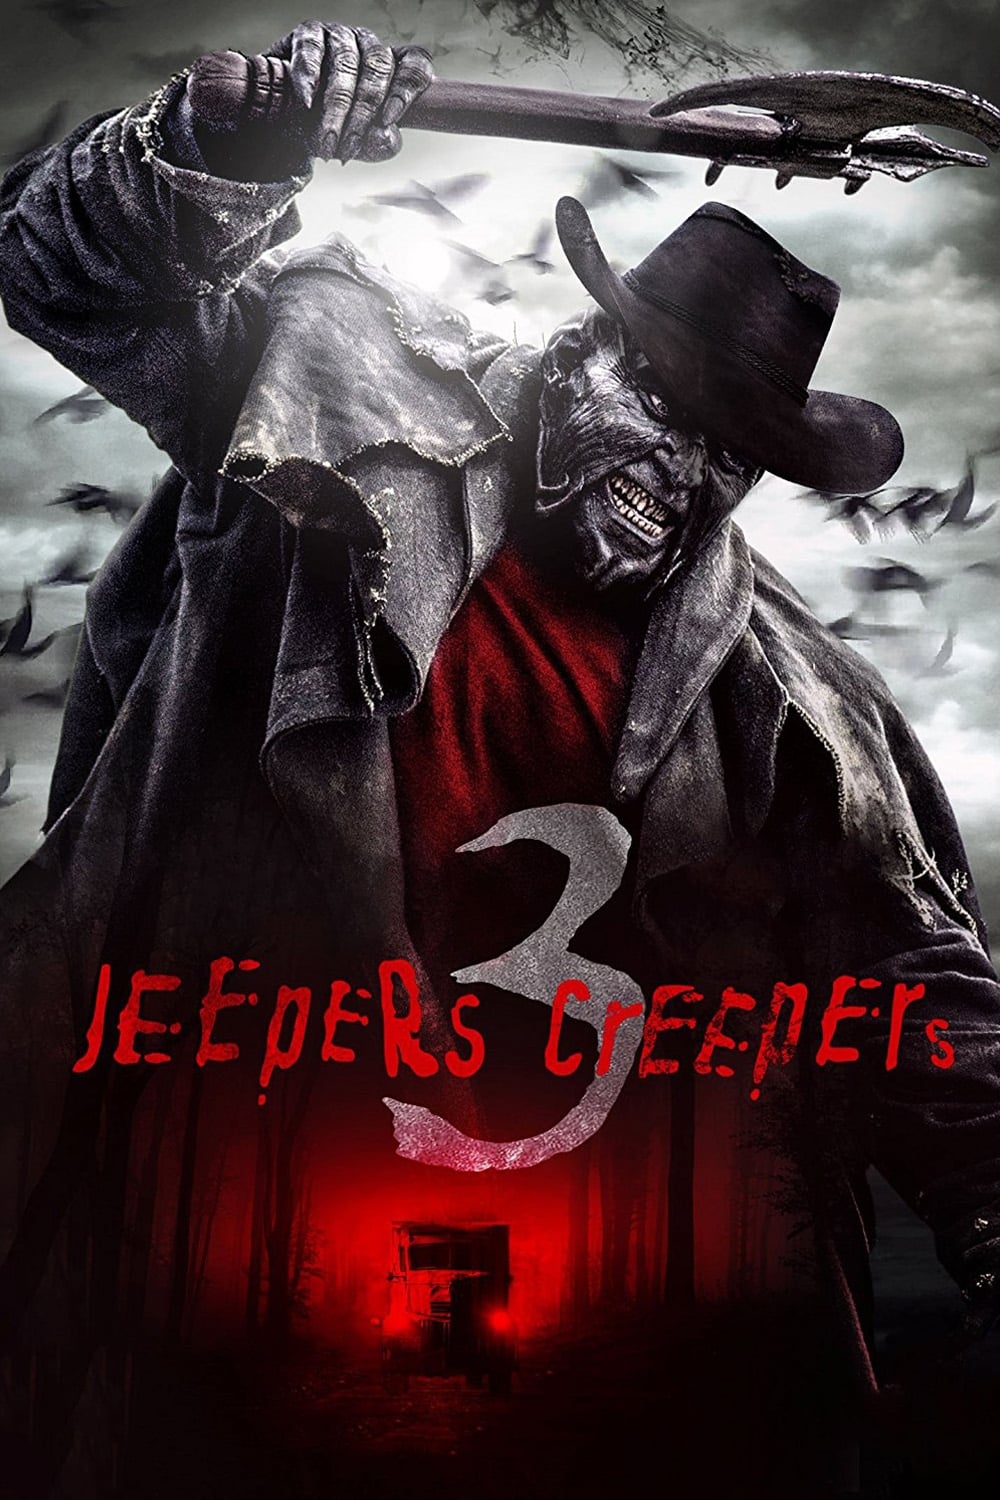 Jeepers Creepers 3 Deutsch